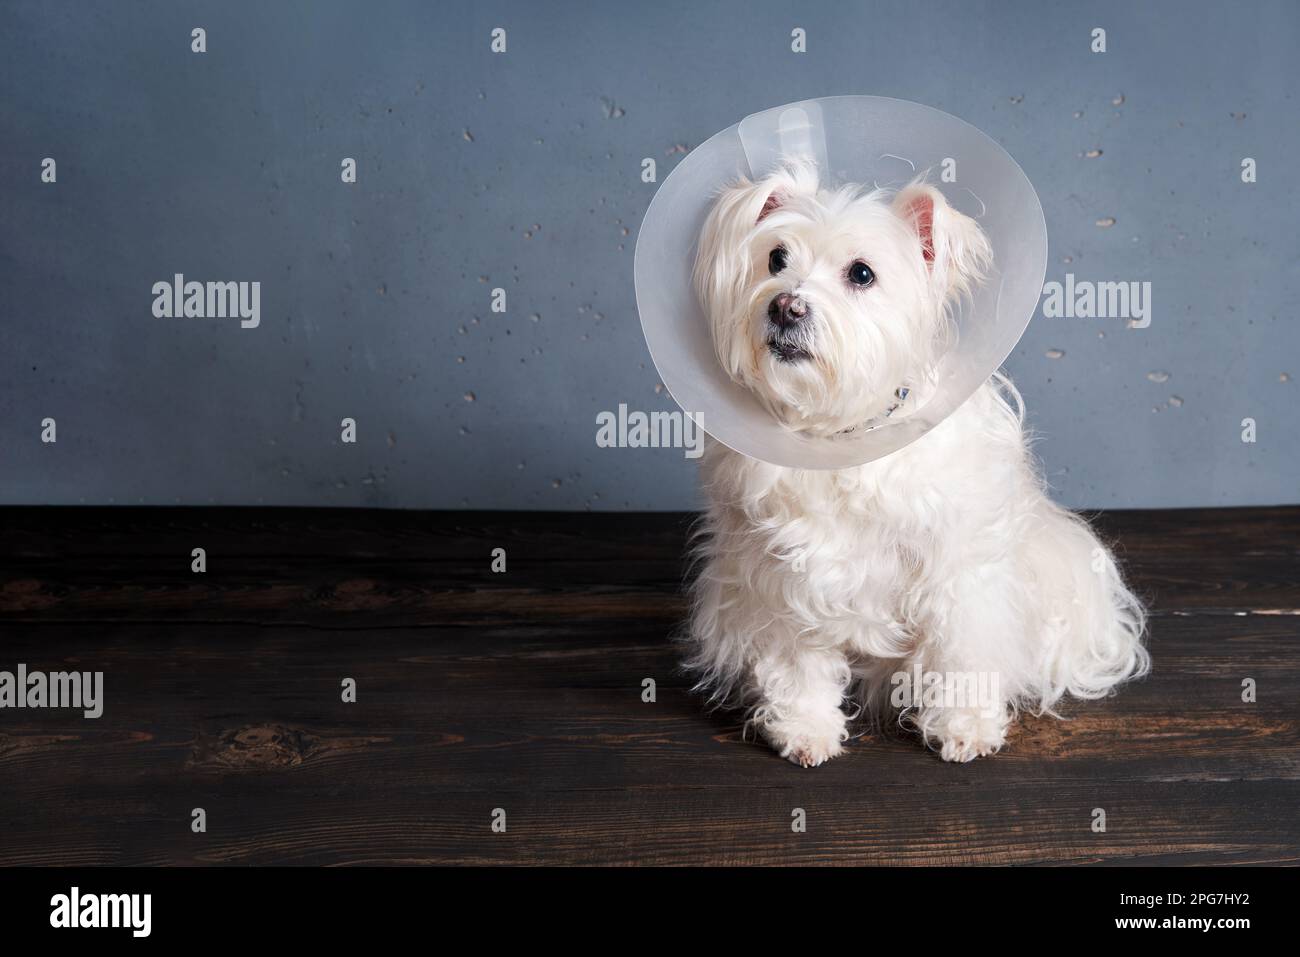 Cute white dog breed in pet cone posing in studio with copy space. Veterinary, animals, pet care concept Stock Photo